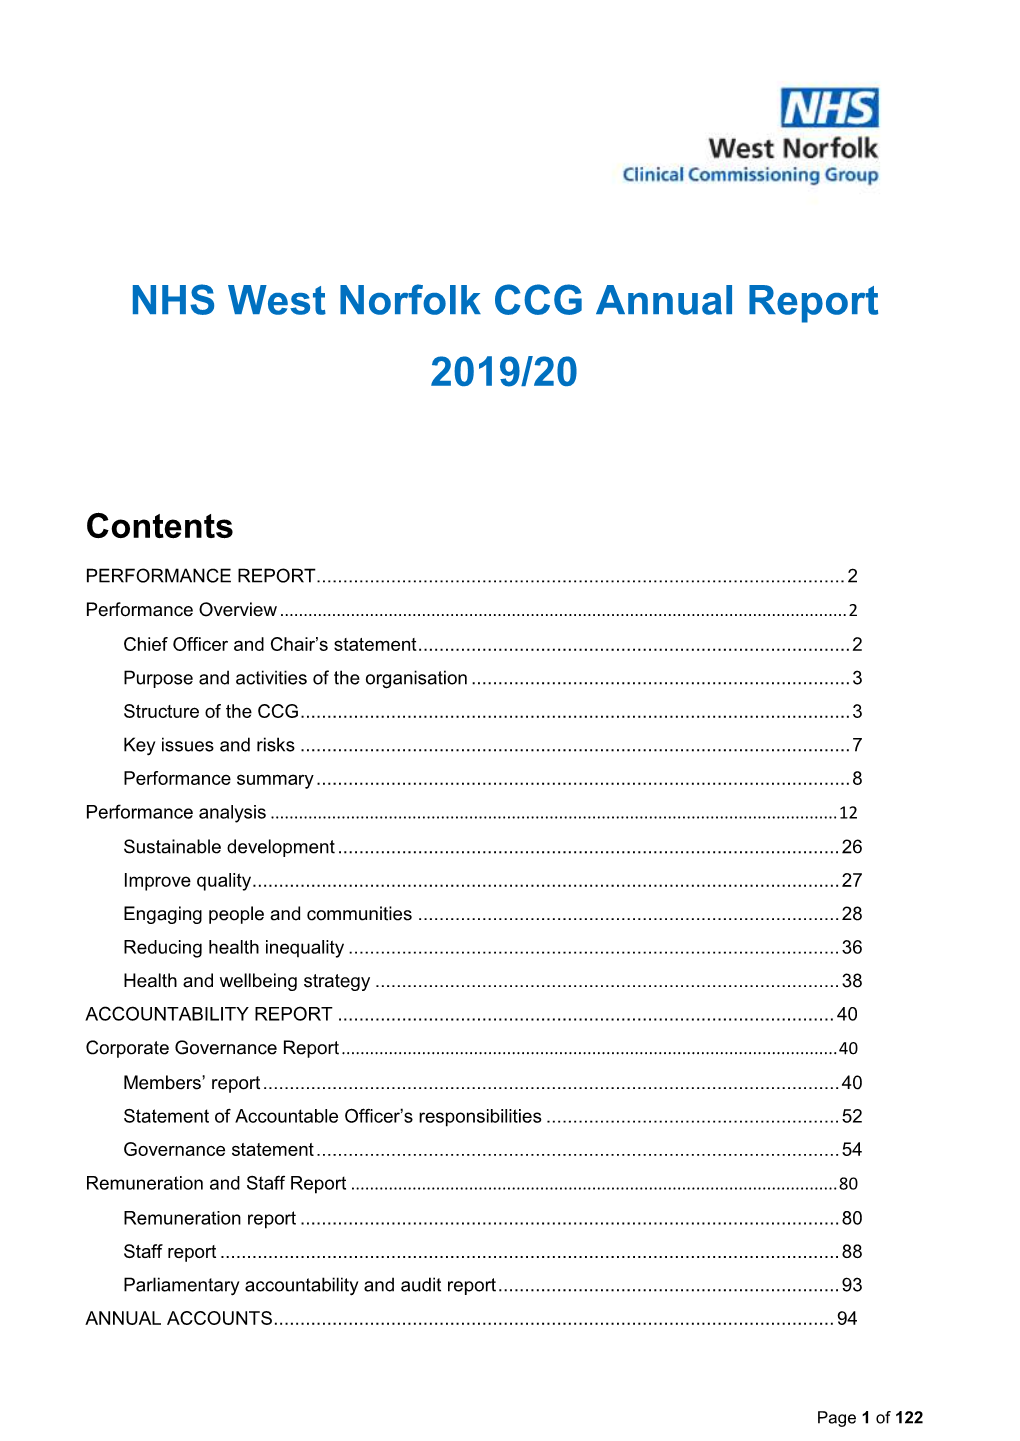 NHS West Norfolk CCG Annual Report 2019/20